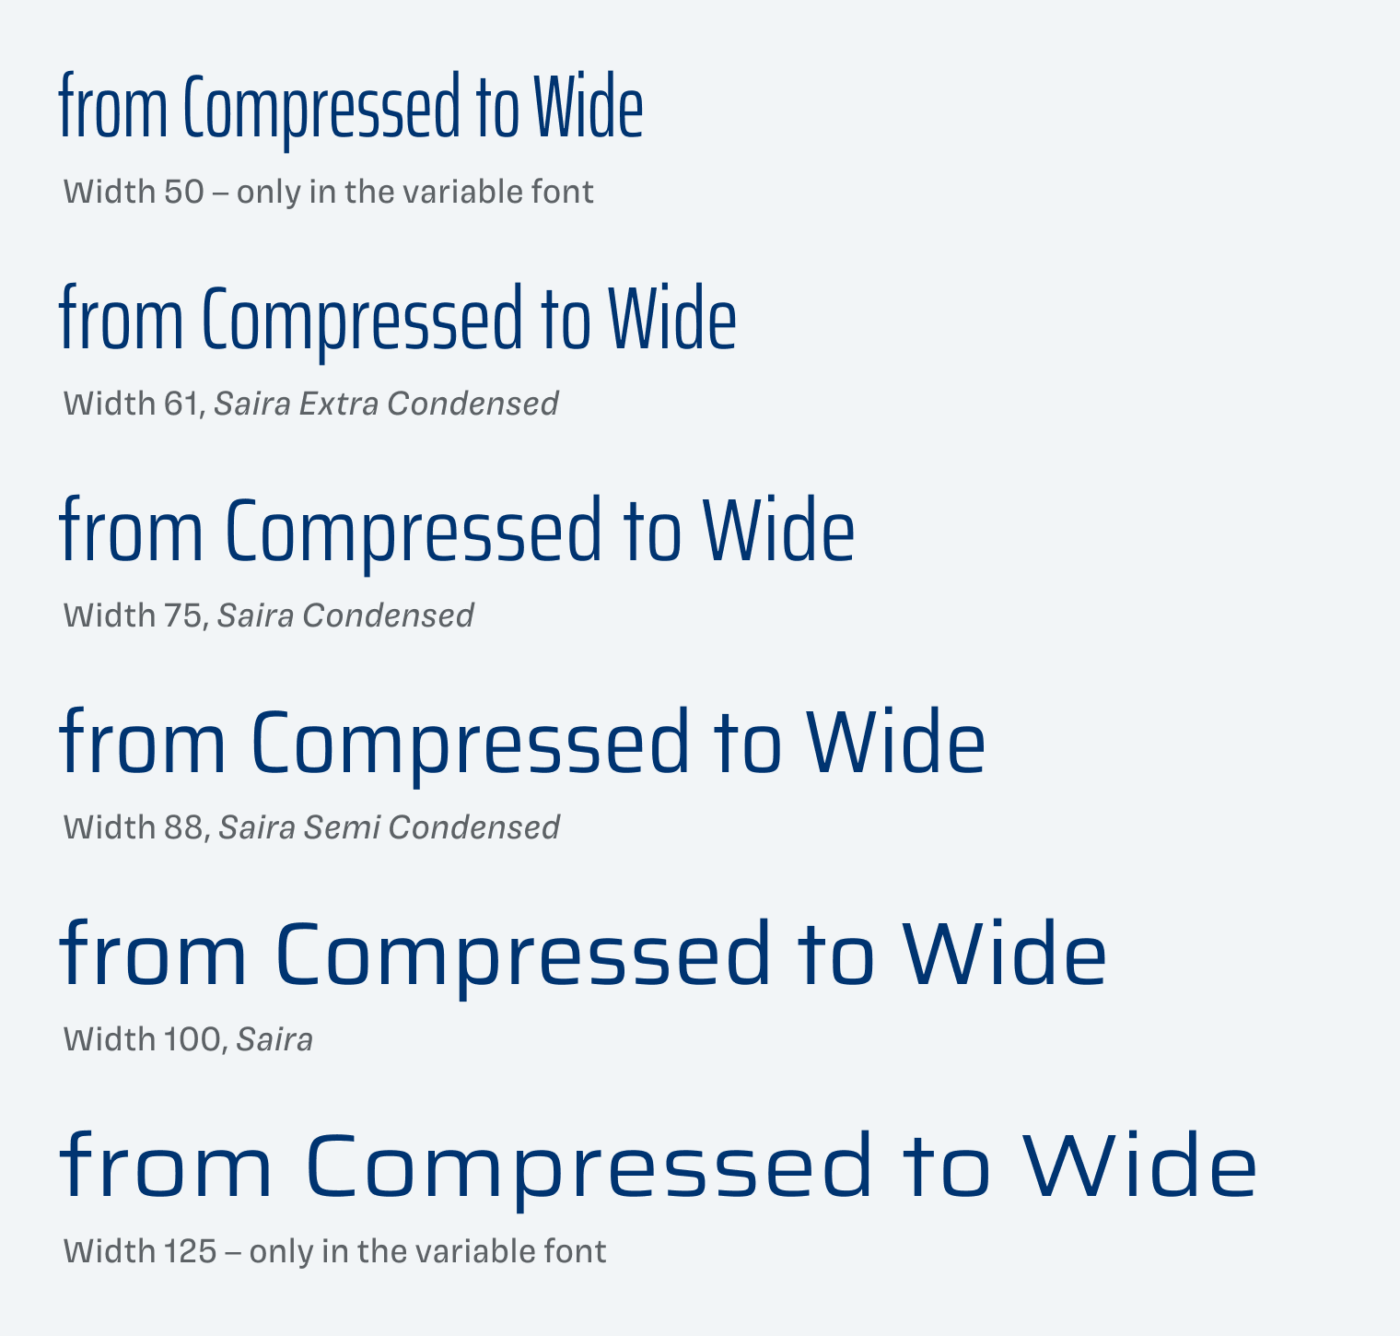 from Compressed to Wide
Width 50 - only in the variable font
Width 61, Saira Extra Condensed
Width 75, Saira Condensed
Width 88, Saira Semi Condensed
Width 100, Saira
Width 125 - only in the variable font